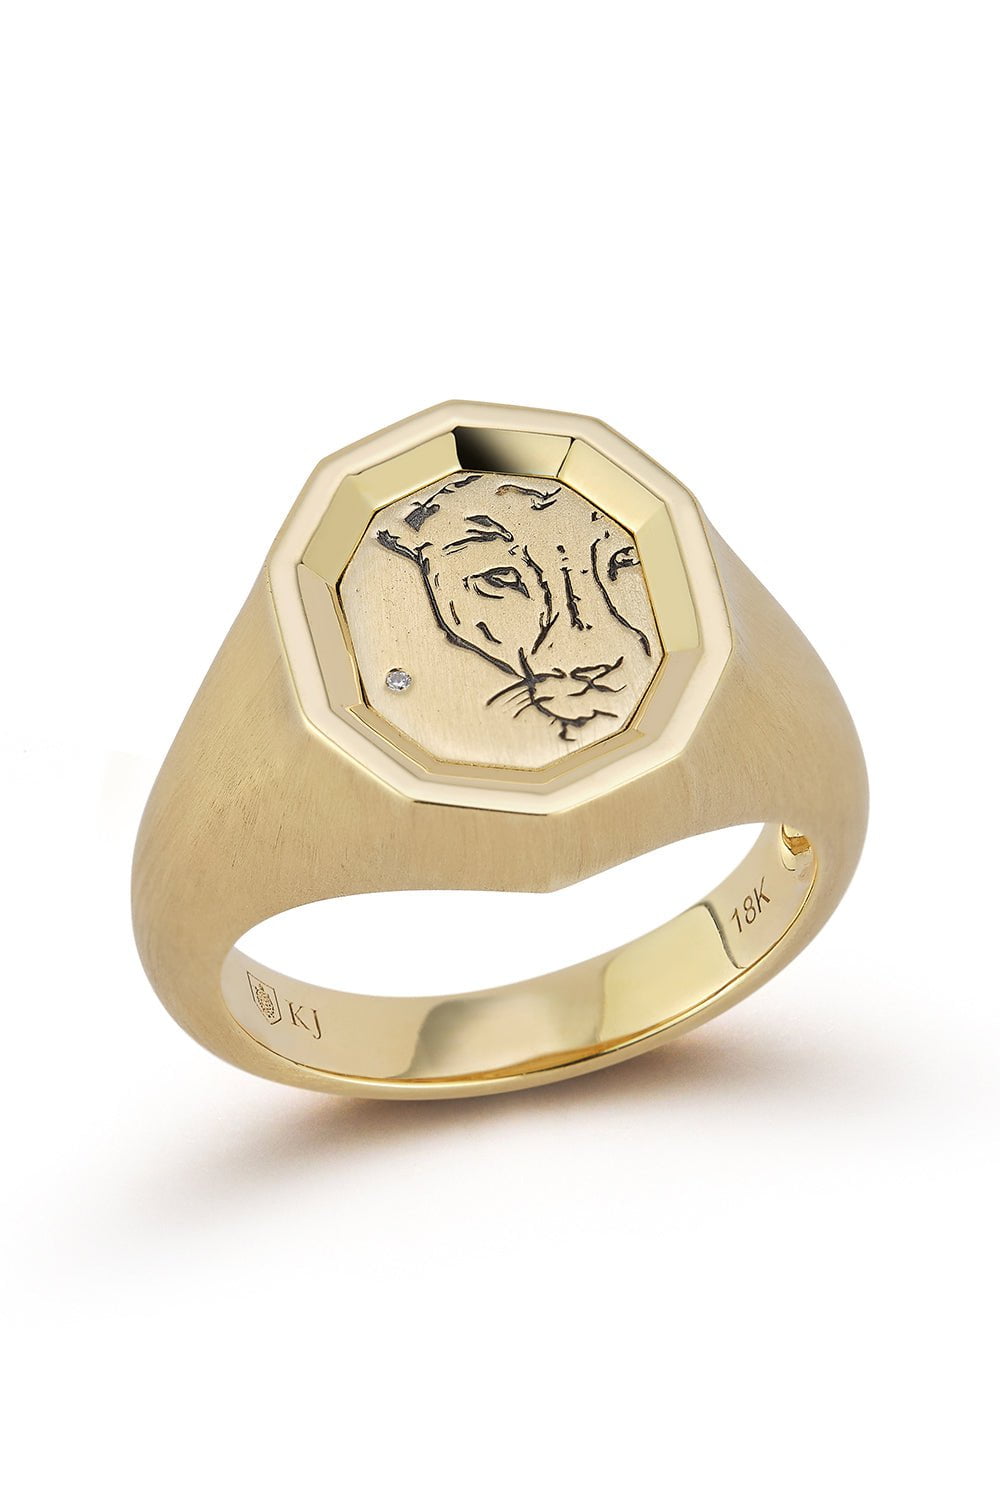 KATHERINE JETTER-The Lioness Ring-YELLOW GOLD